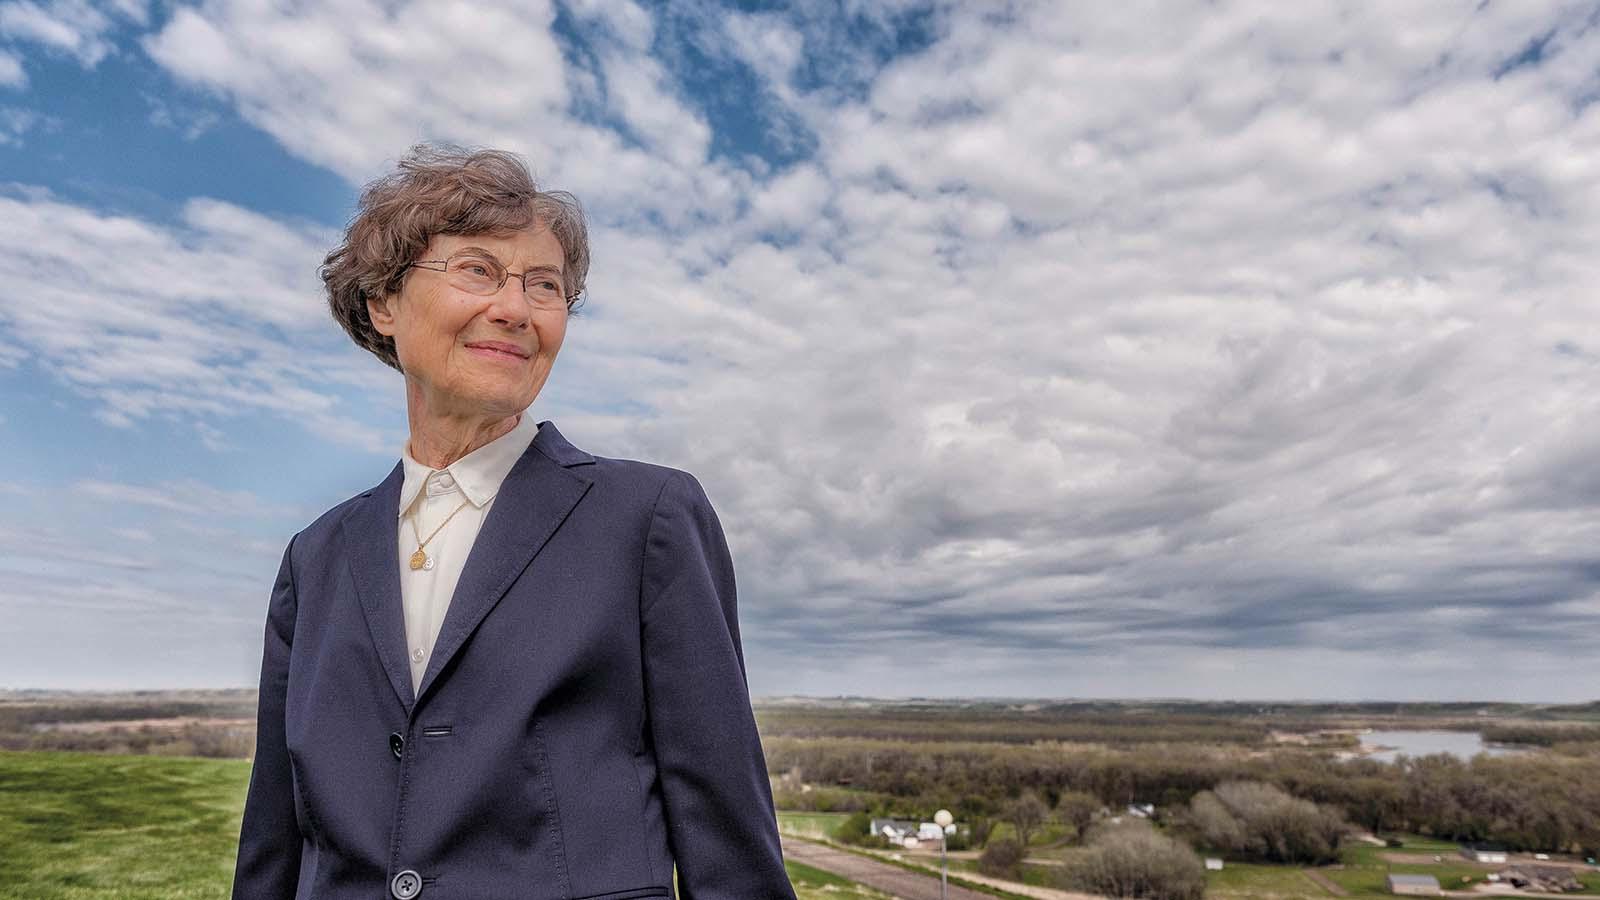 Portrait of Sister Thomas campus overlooking the bluff outside the University of Mary campus.